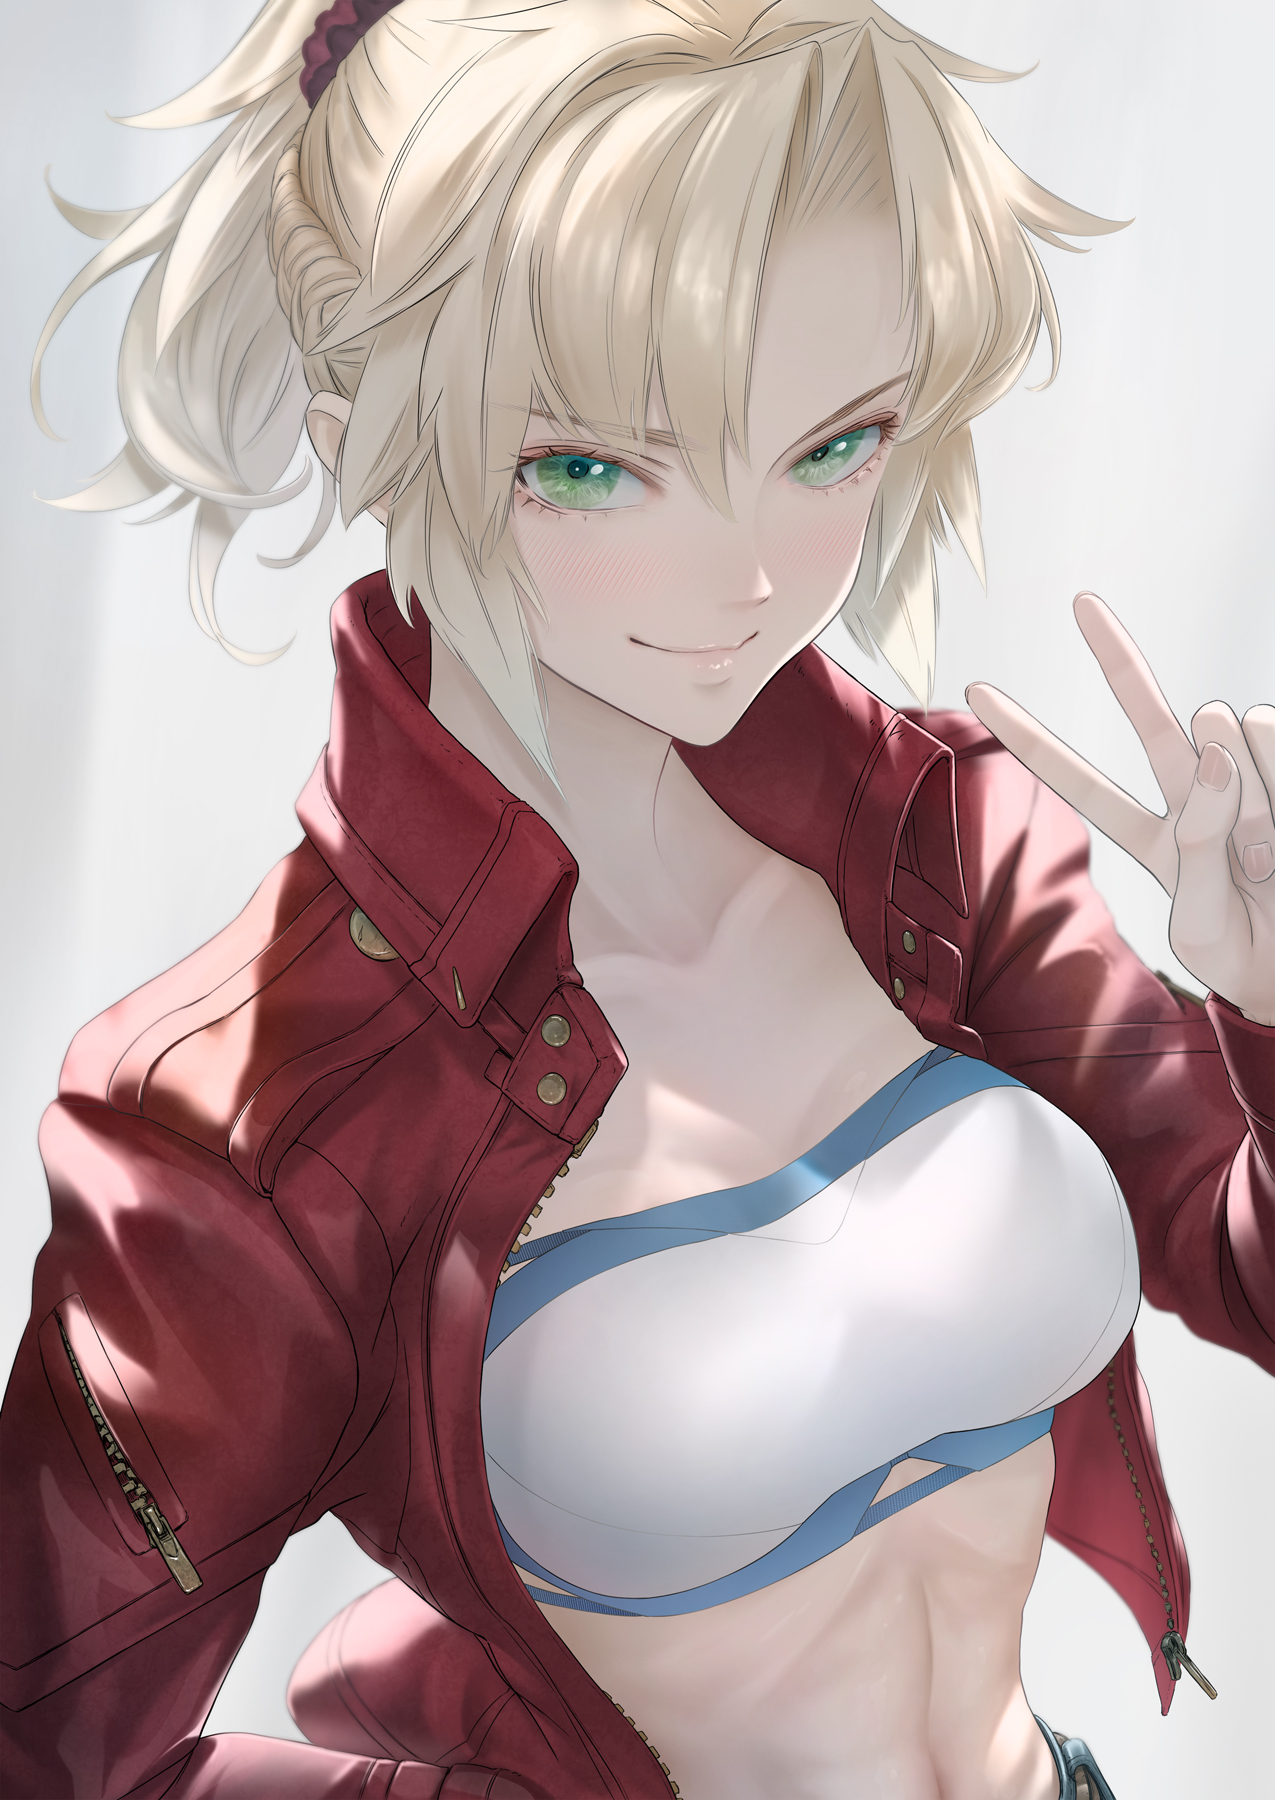 Anime 1275x1800 Fate/Apocrypha  Fate series cleavage peace sign red jackets ponytail bangs green eyes smiling blushing anime girls bandeau top french braids Mordred (Fate/Apocrypha) Fate/Grand Order curvy high angle anime 2D looking at viewer portrait display fan art I_MI_ZU open jacket crop top blonde